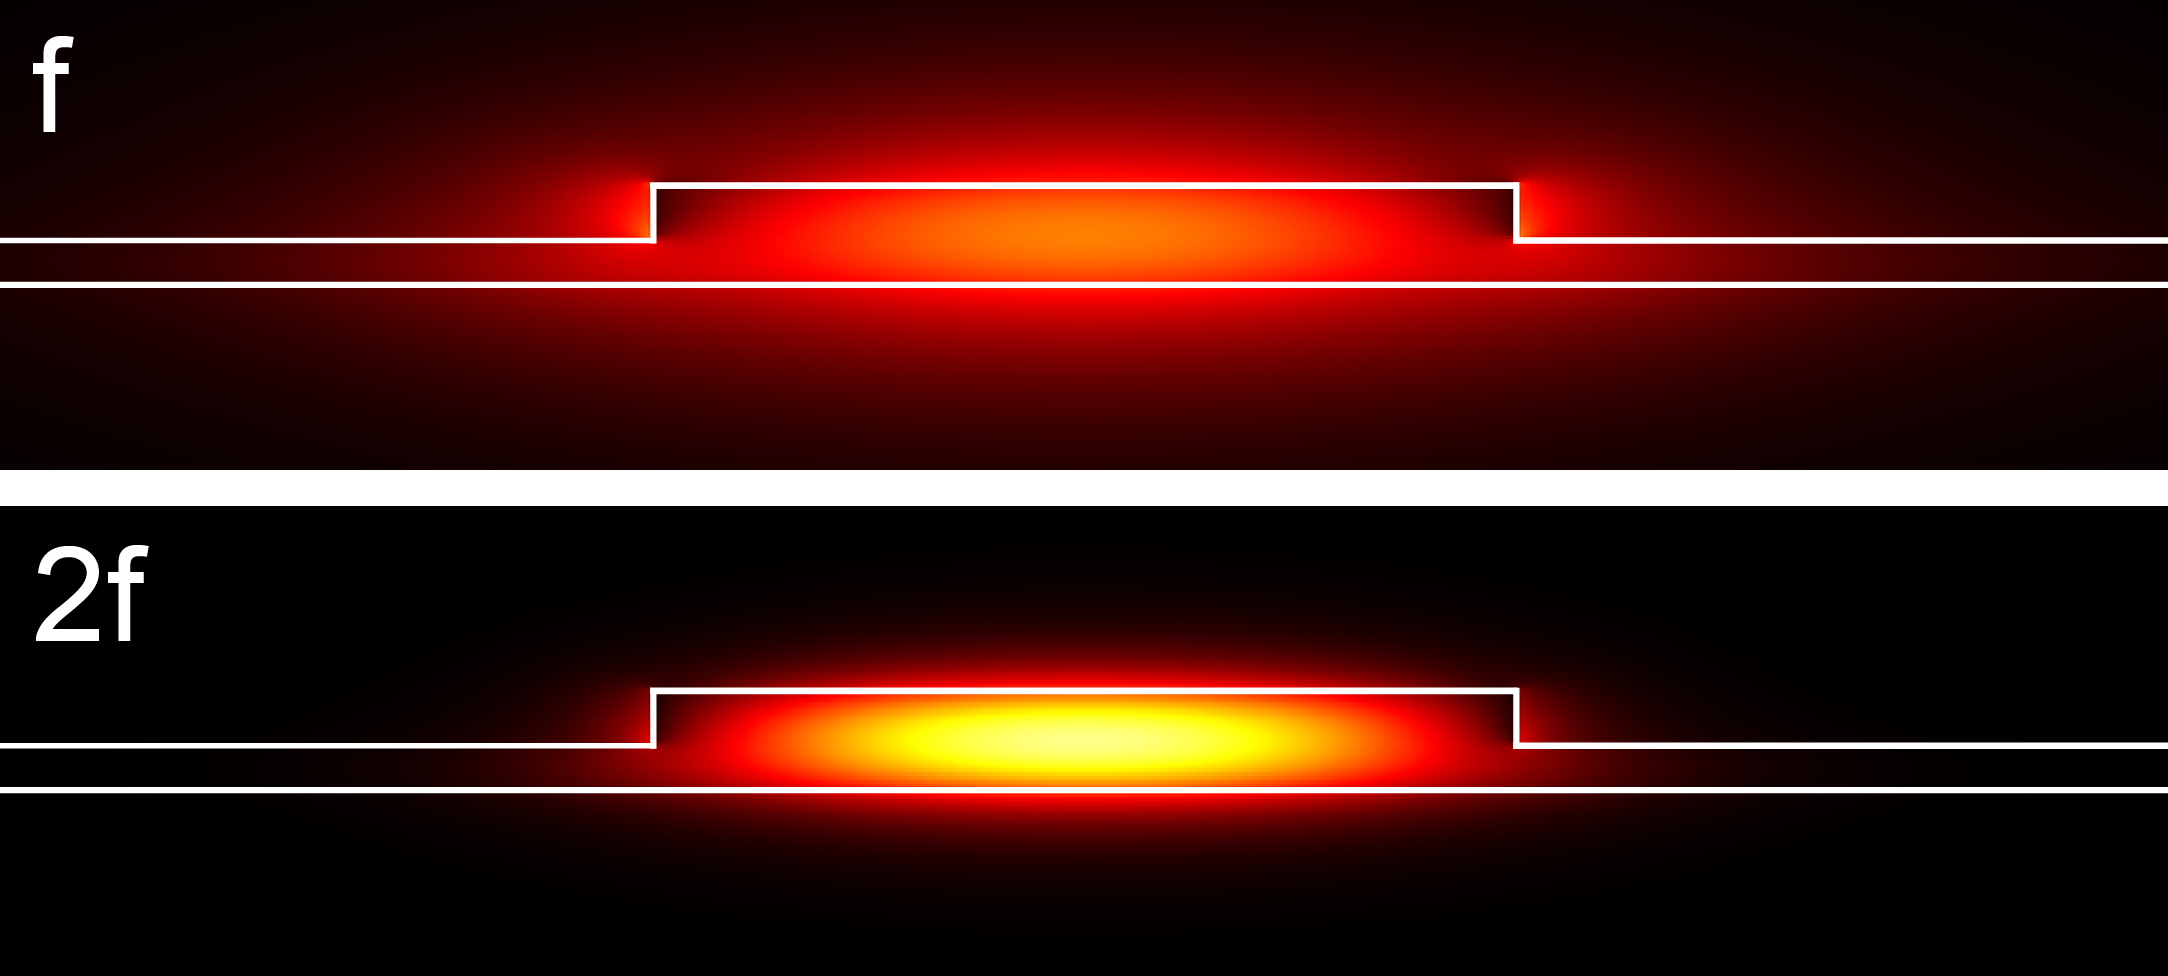 New resource for optical chips